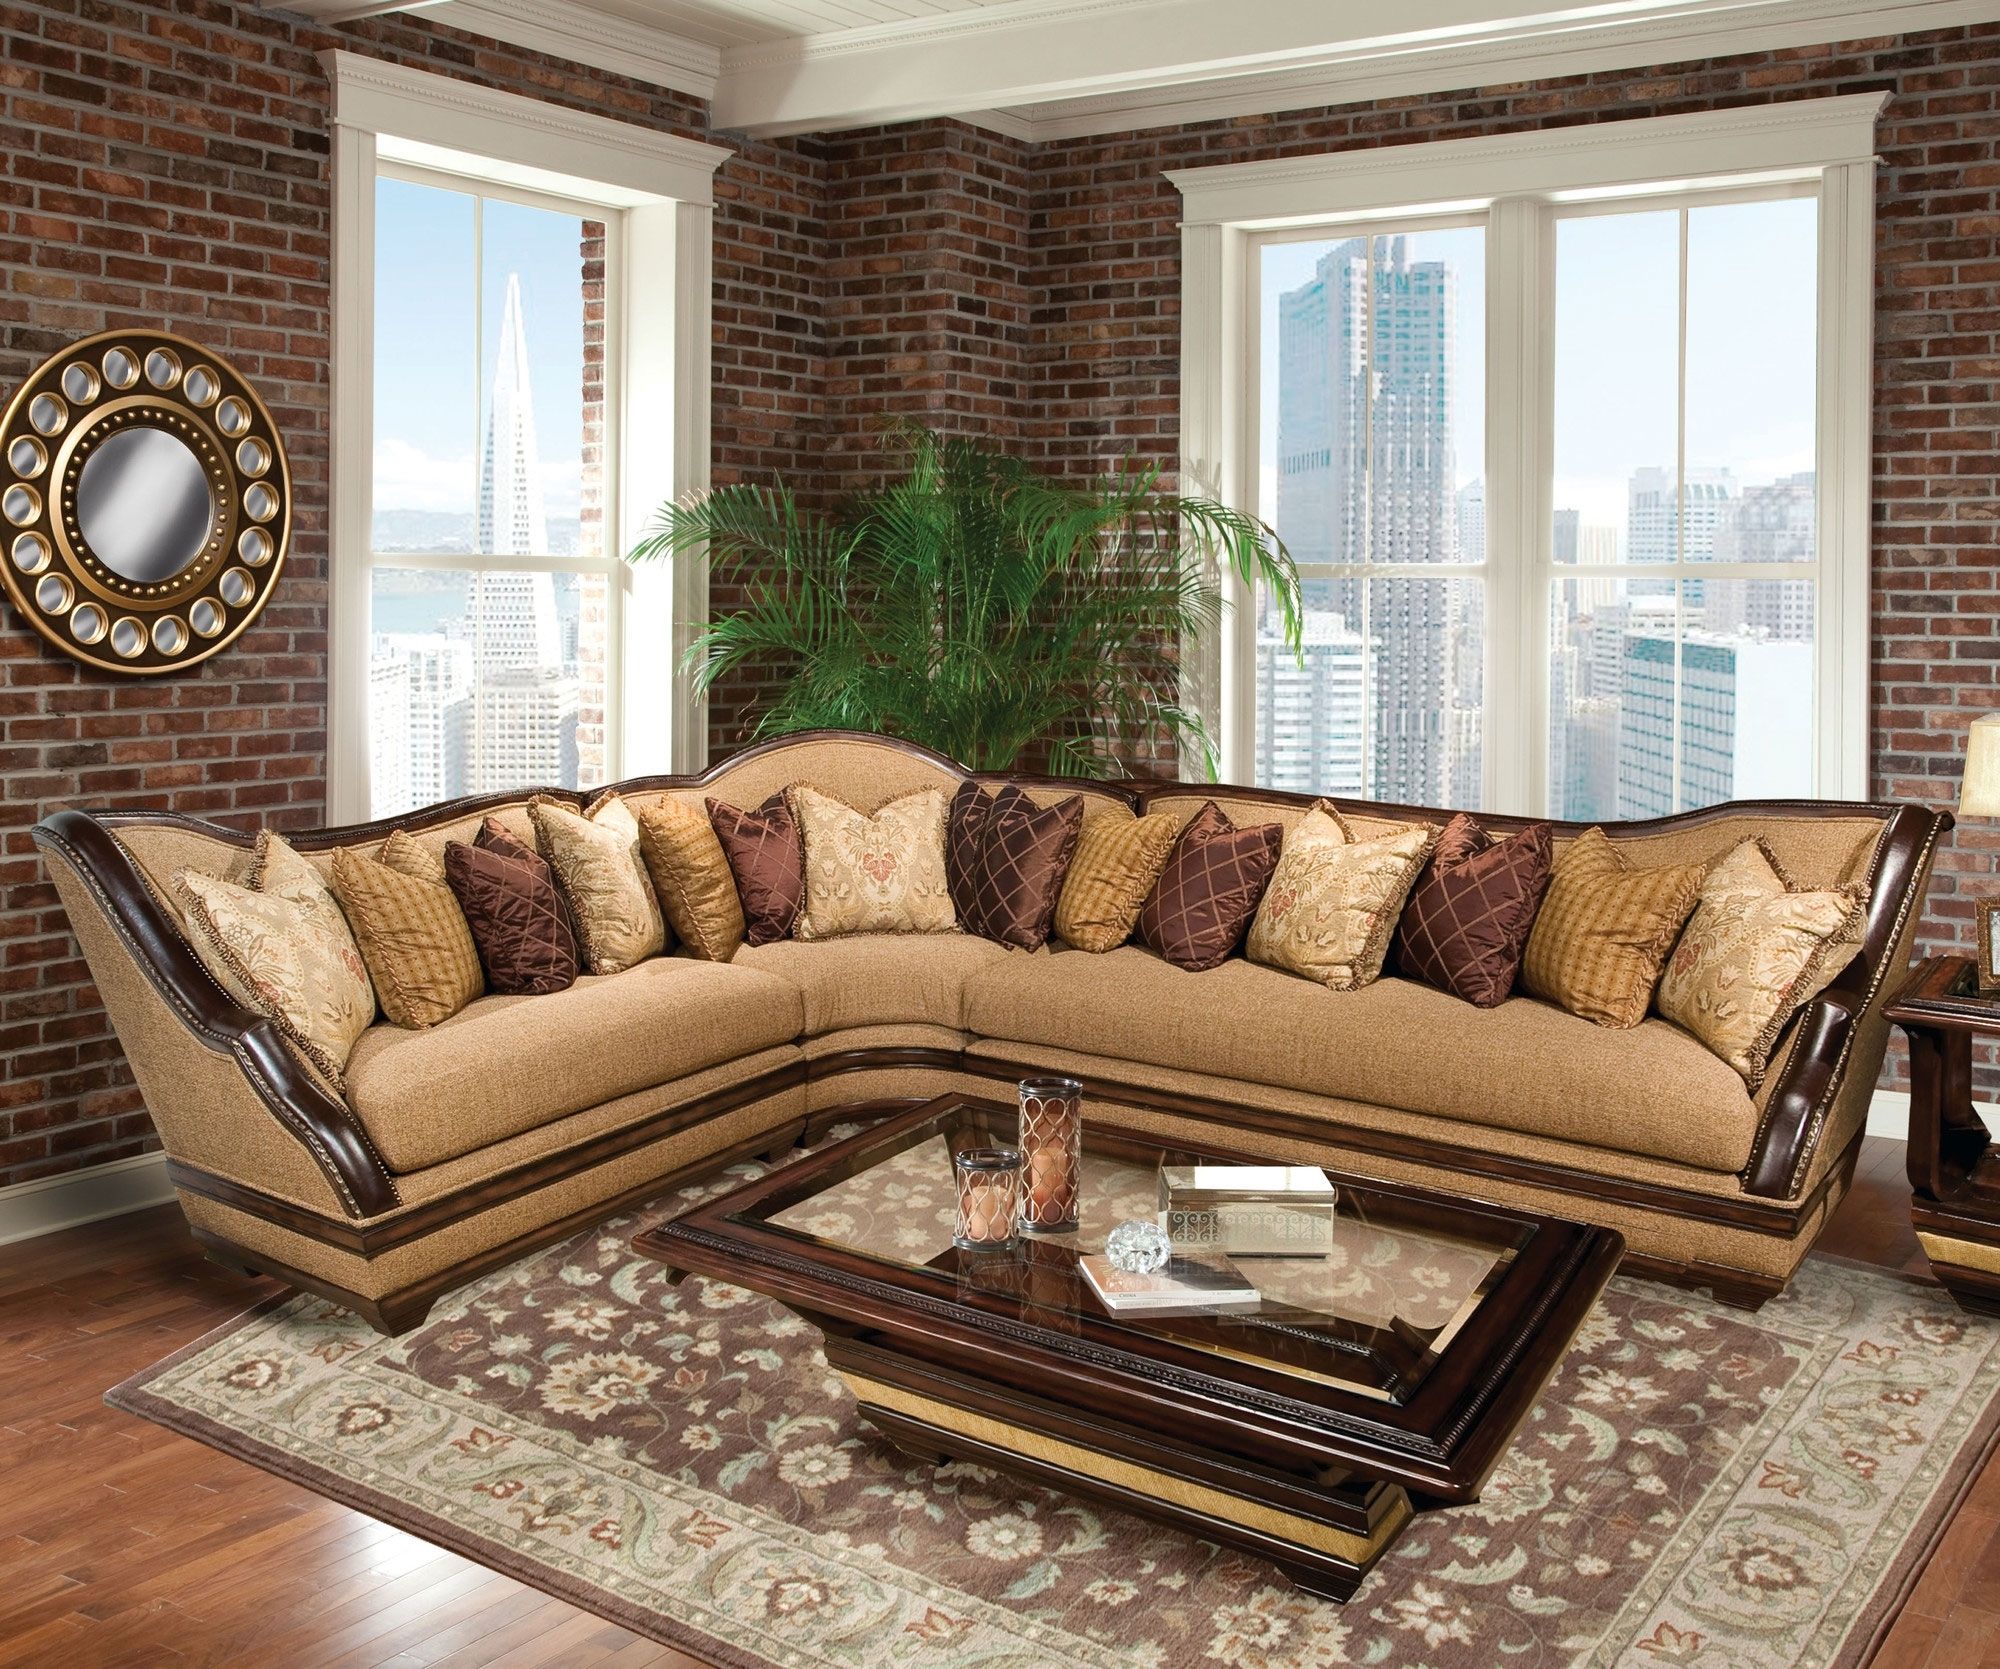 Benetti's Italia Beladonna Wood Trim Sectional Sofa Set The Within Luxury Sectional Sofas (View 5 of 10)